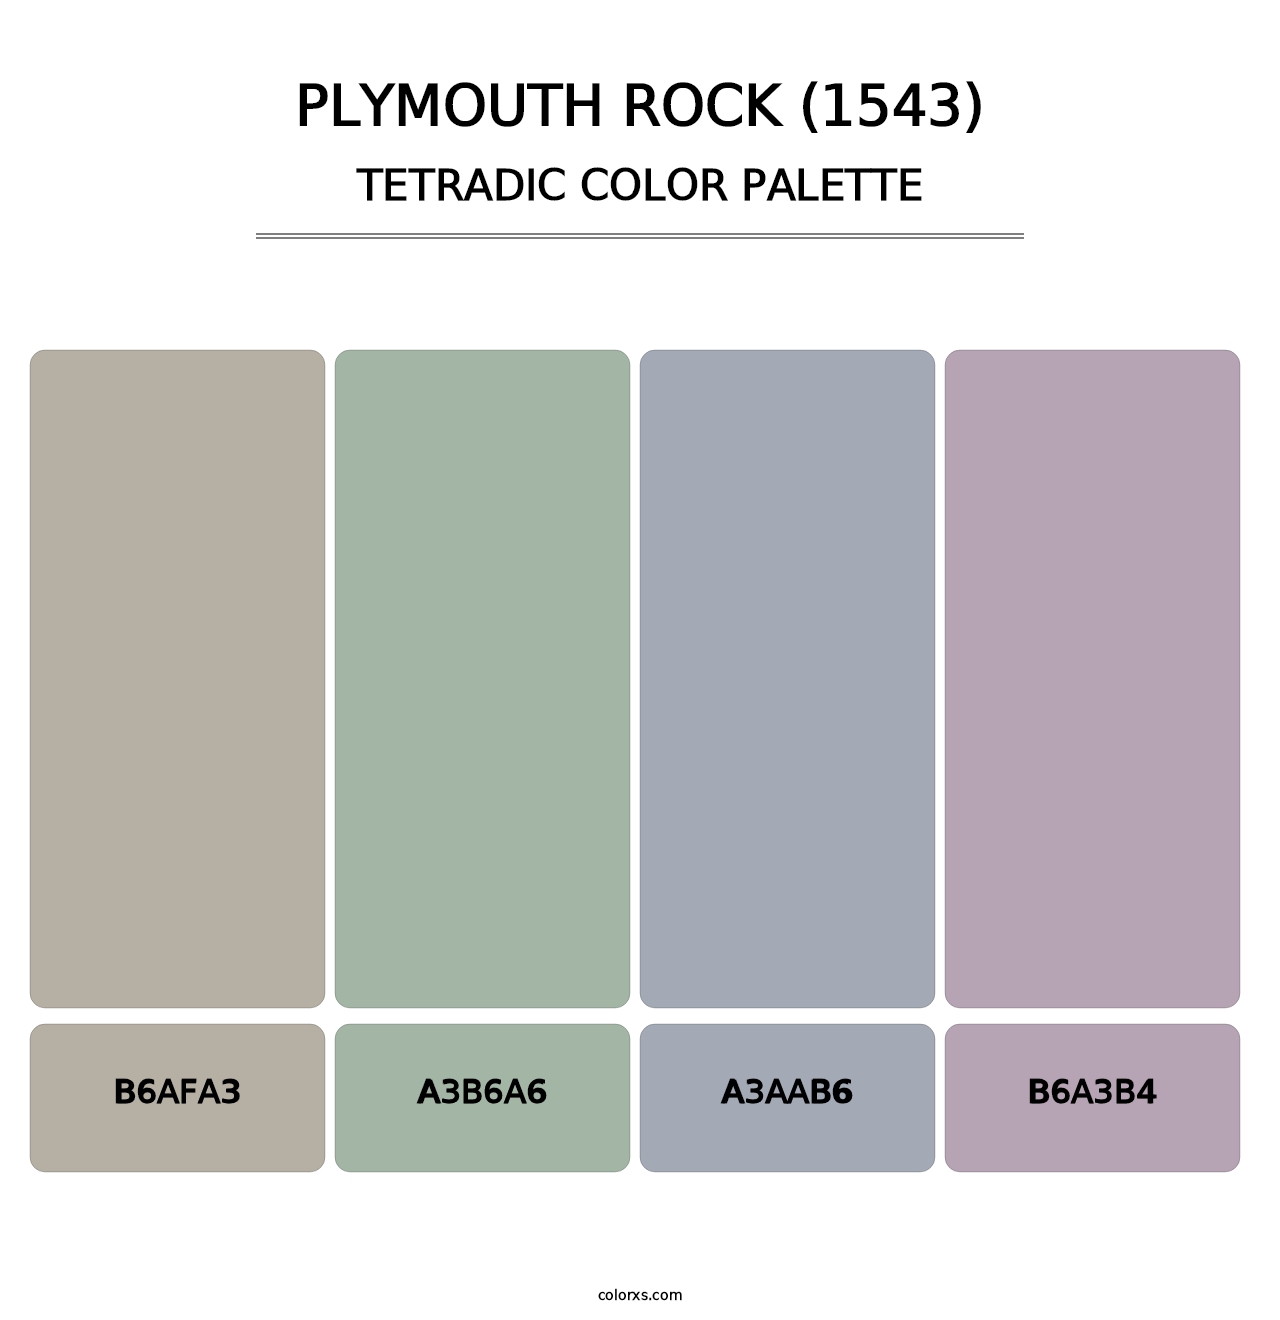 Plymouth Rock (1543) - Tetradic Color Palette